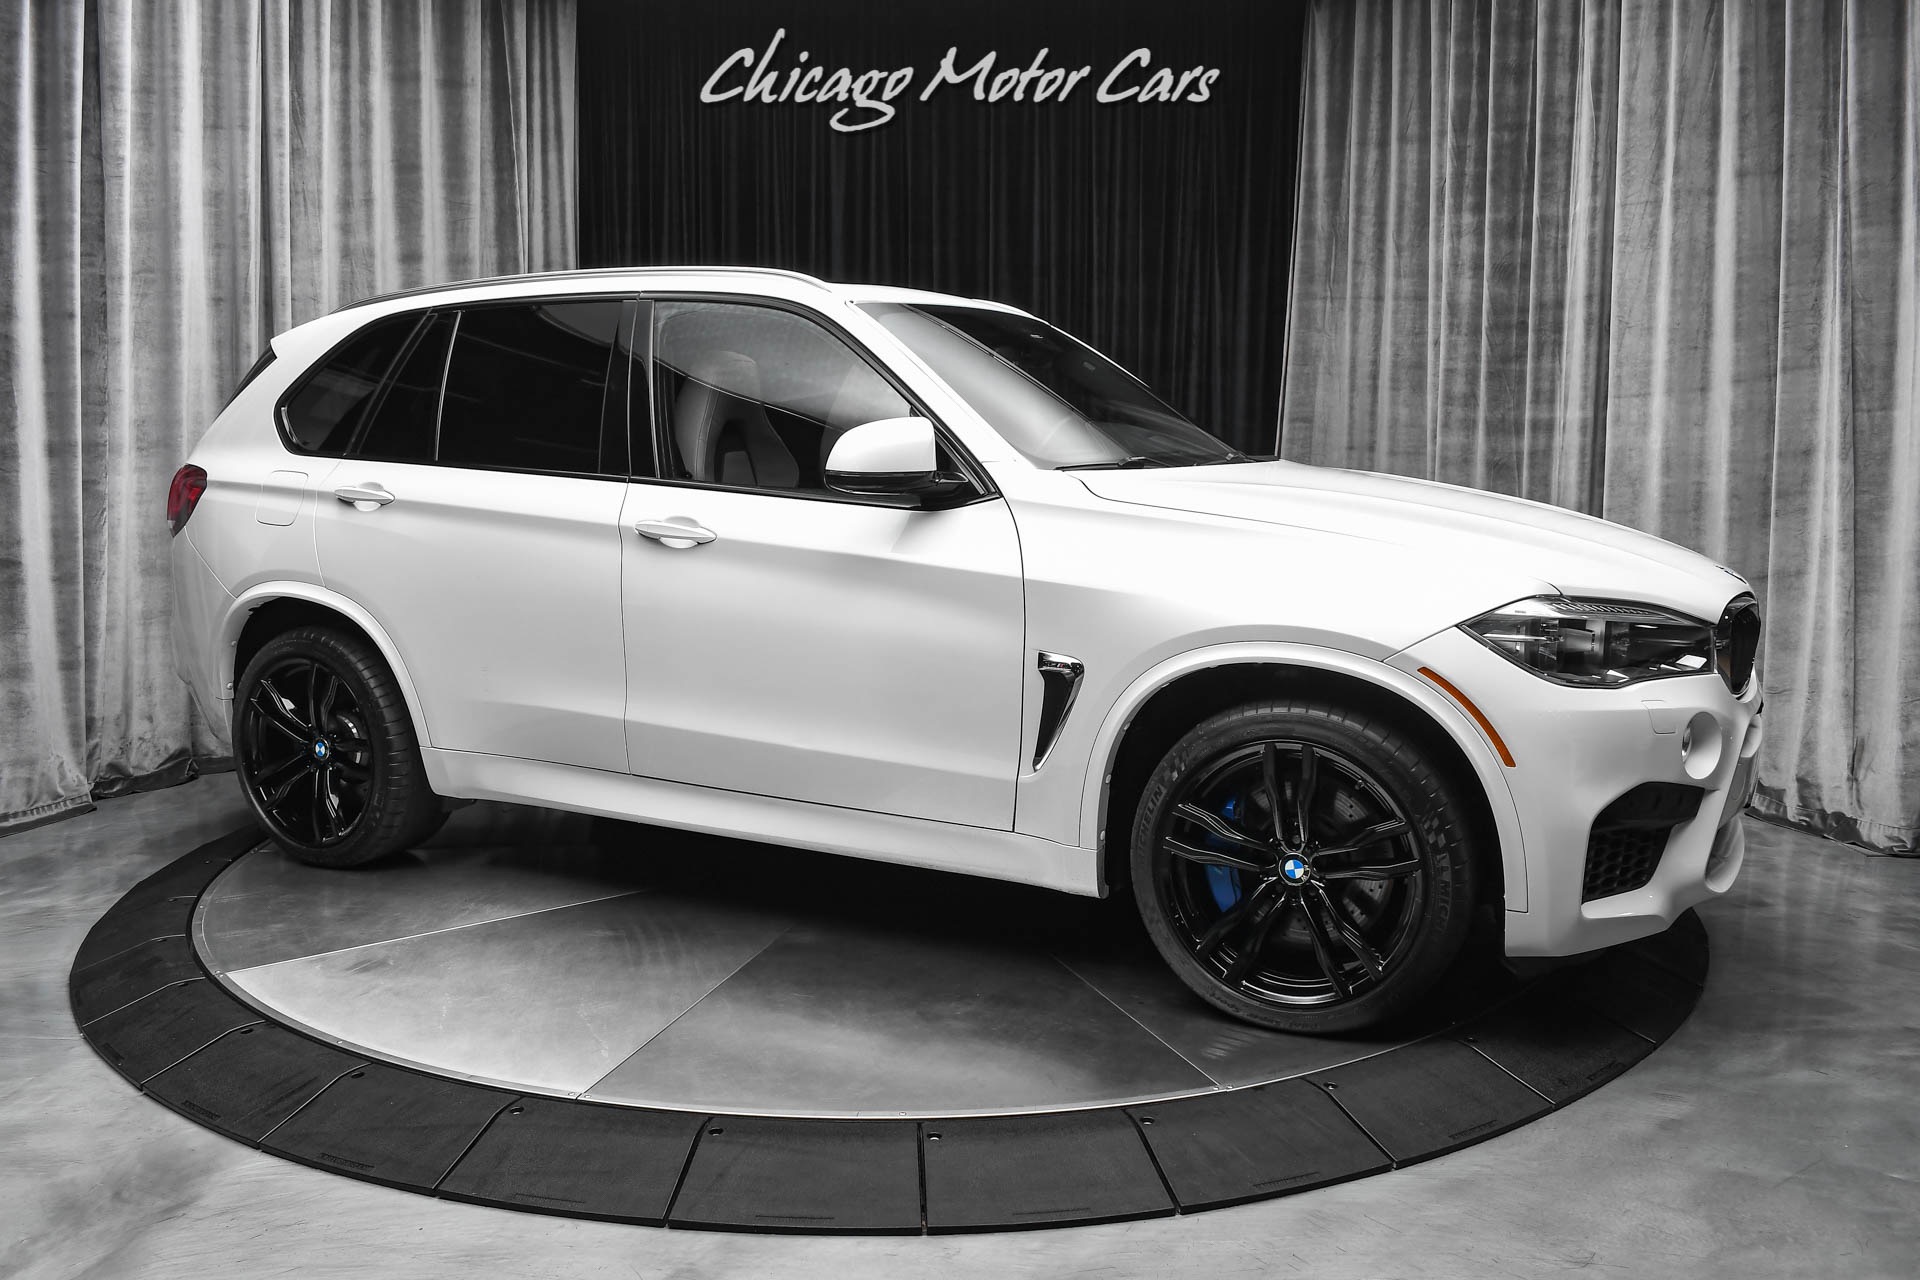 Used 2016 BMW X5M $106k+MSRP! Executive Package! Beige Leather! For Sale  (Special Pricing) | Chicago Motor Cars Stock #18051